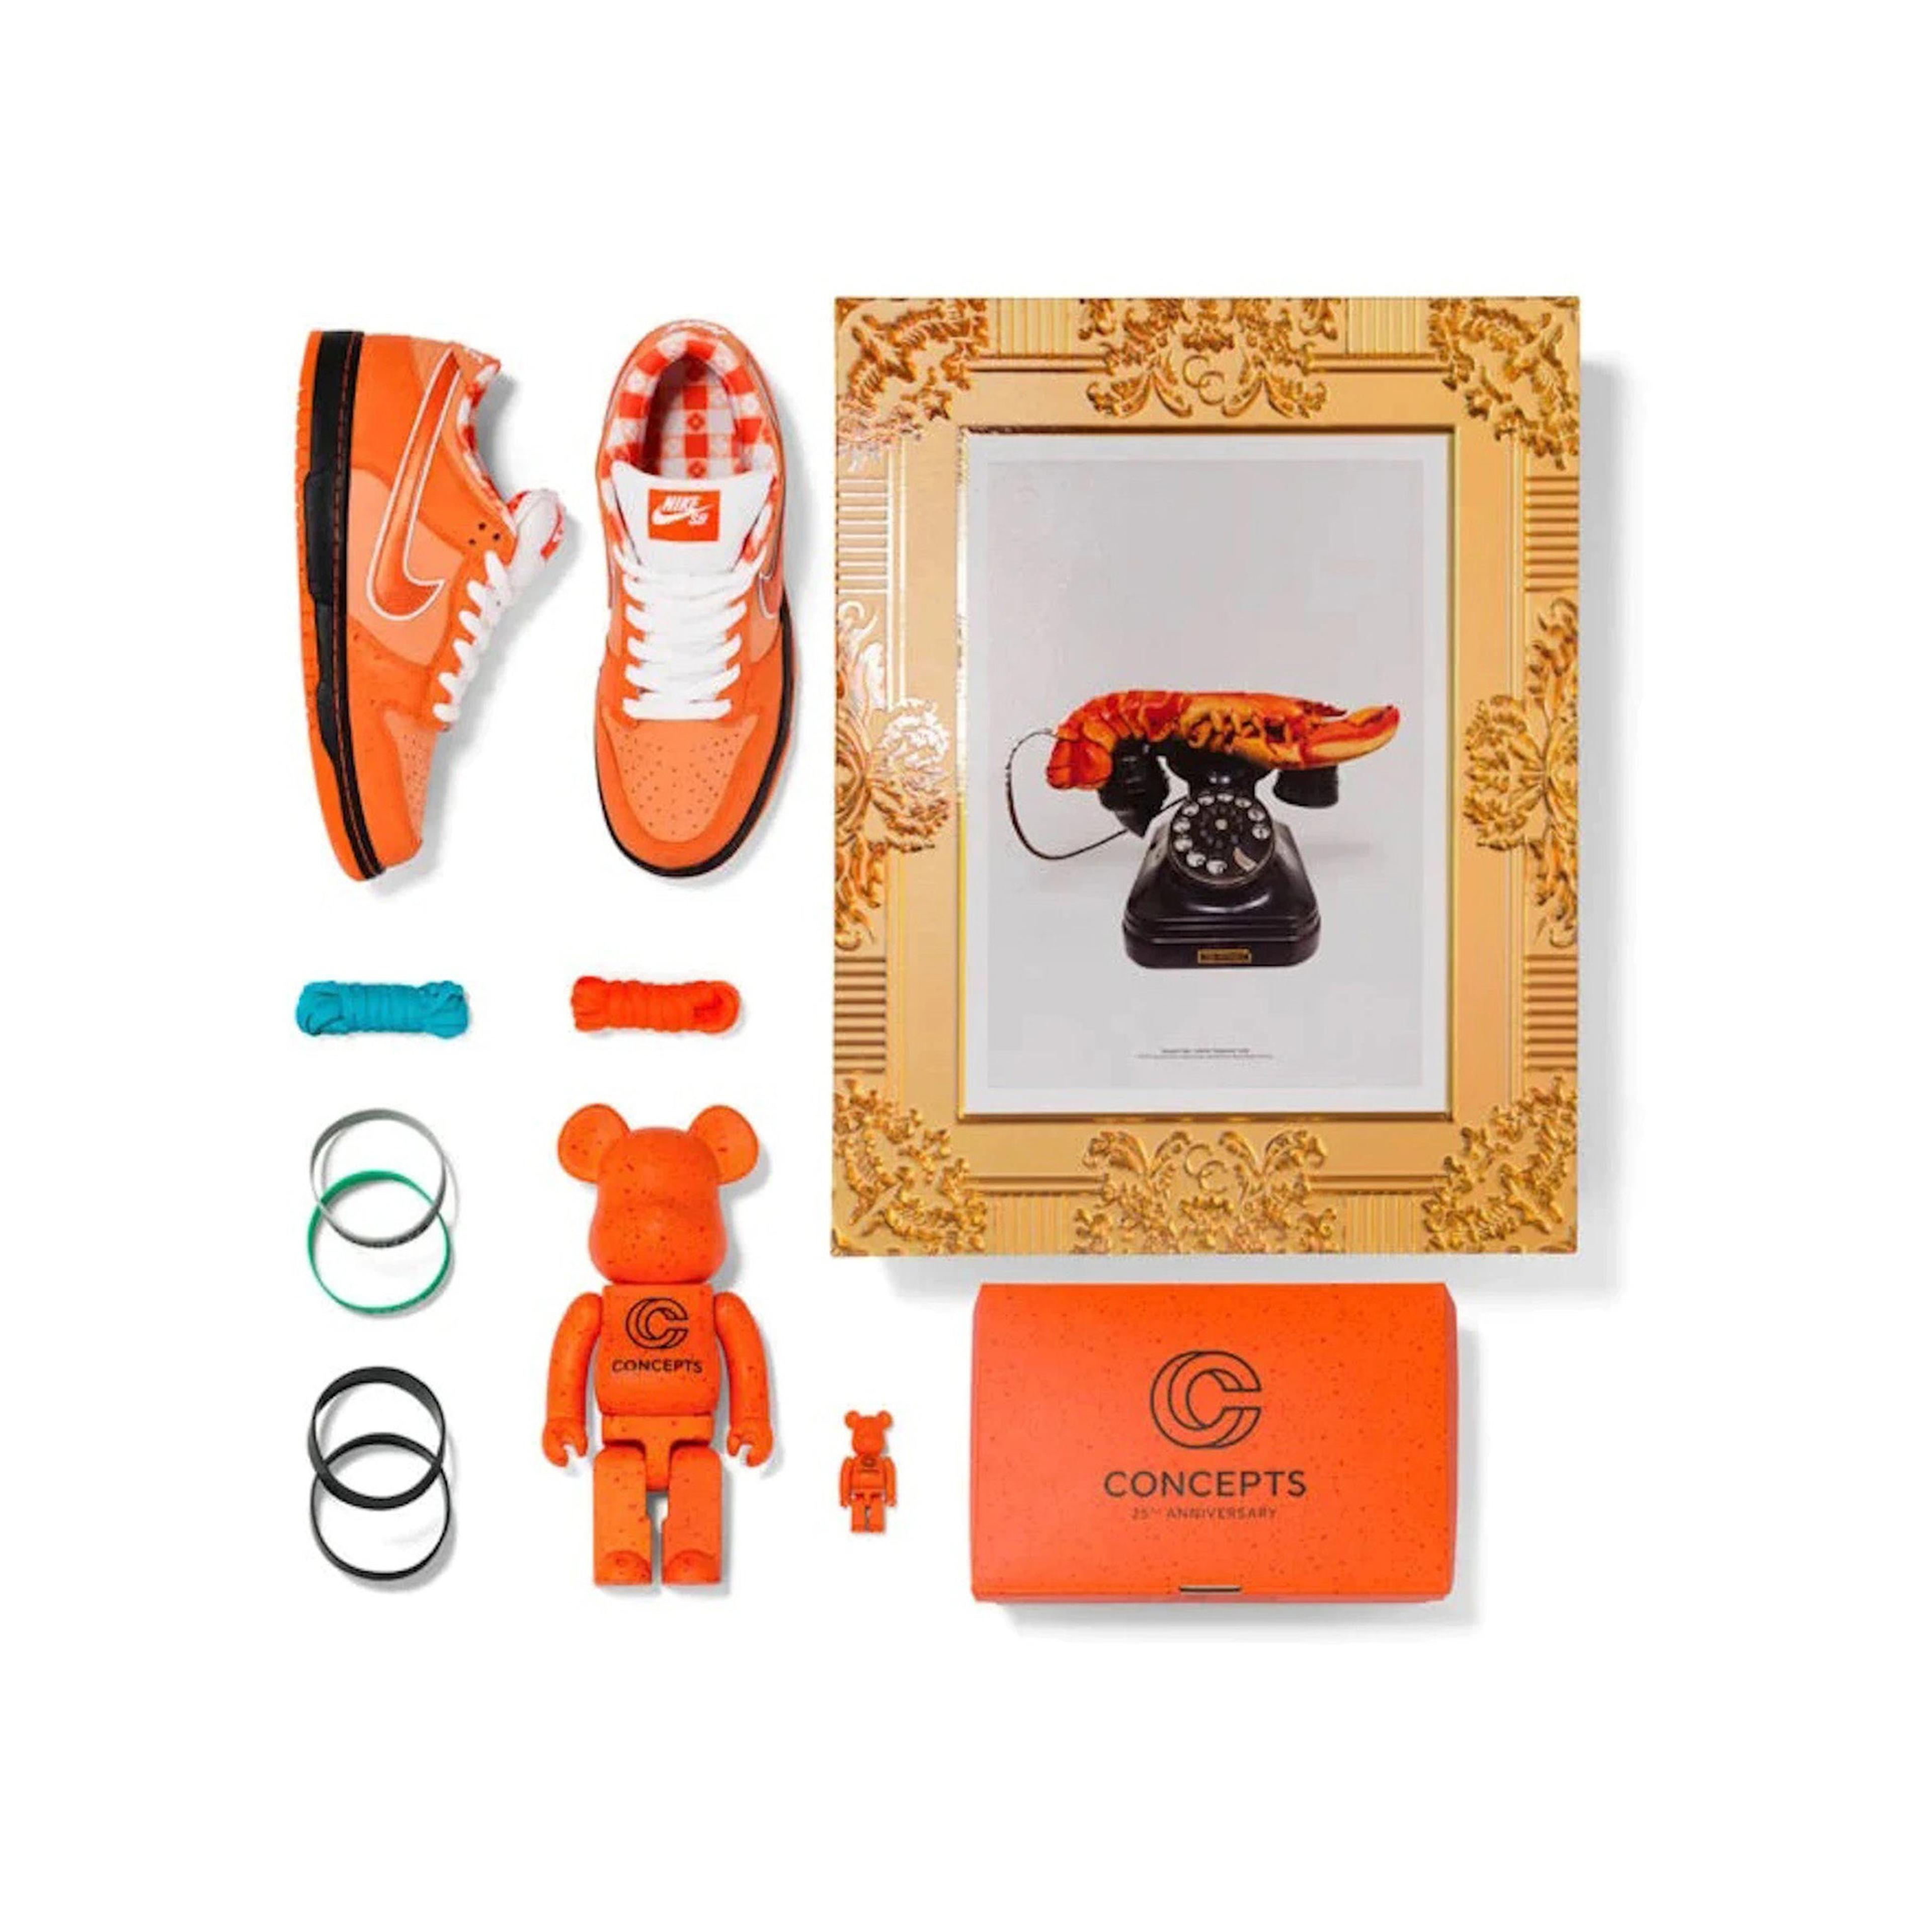 Alternate View 1 of Nike SB Dunk Low Concepts Orange Lobster (Special Box)